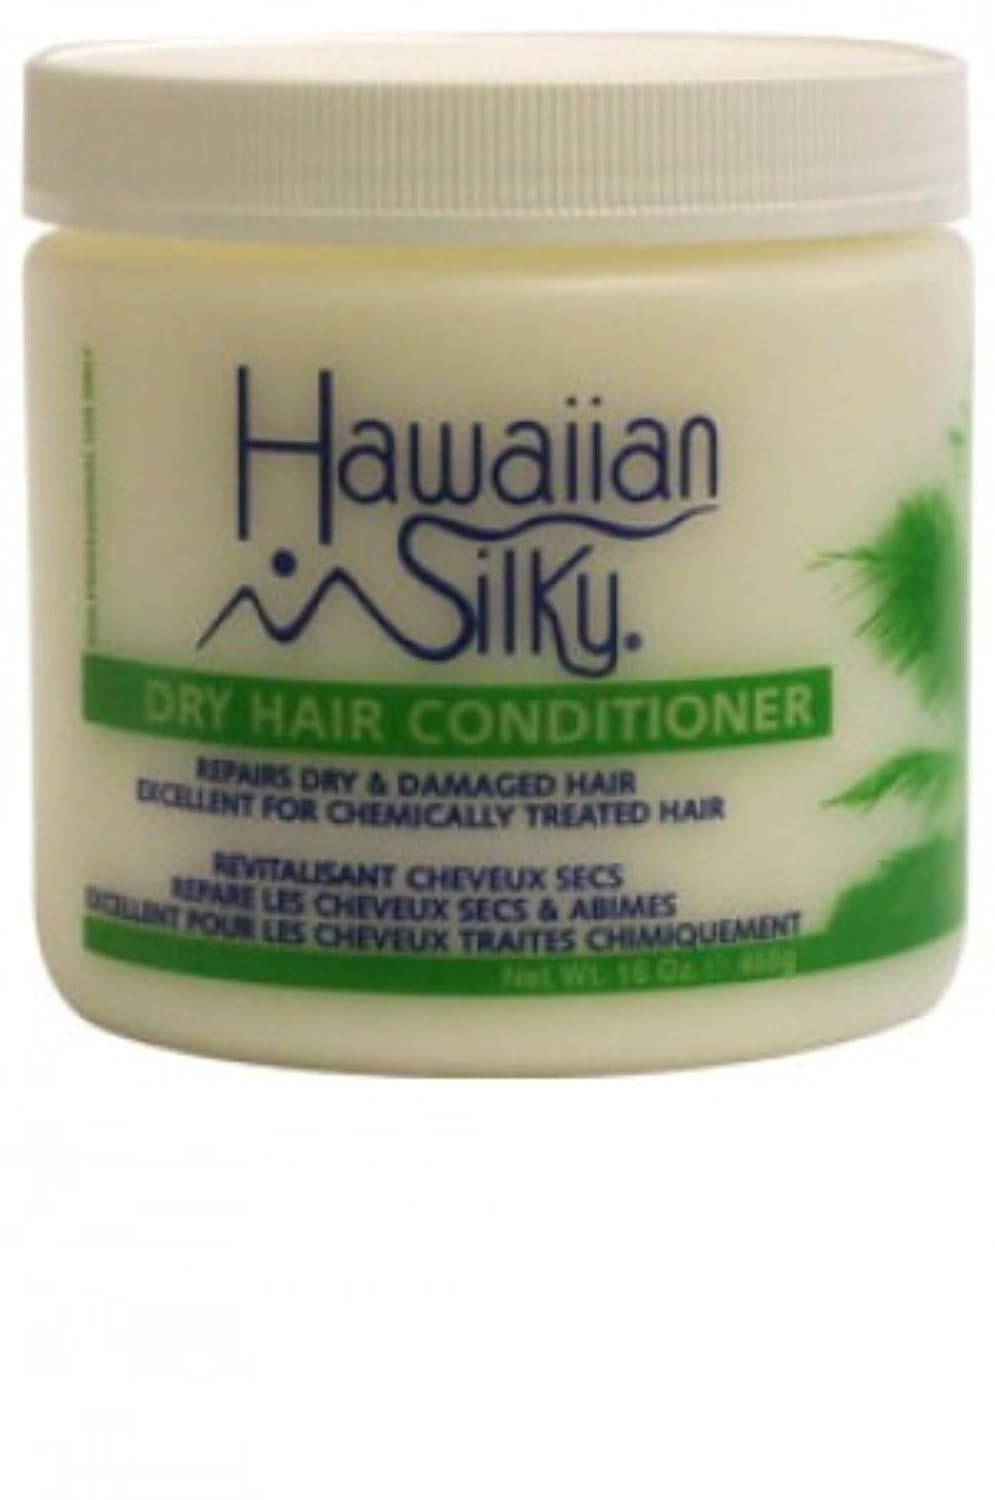 Hawaiian Silky Signature Collection Dry Hair Conditioner 16 oz : Beauty & Personal Care